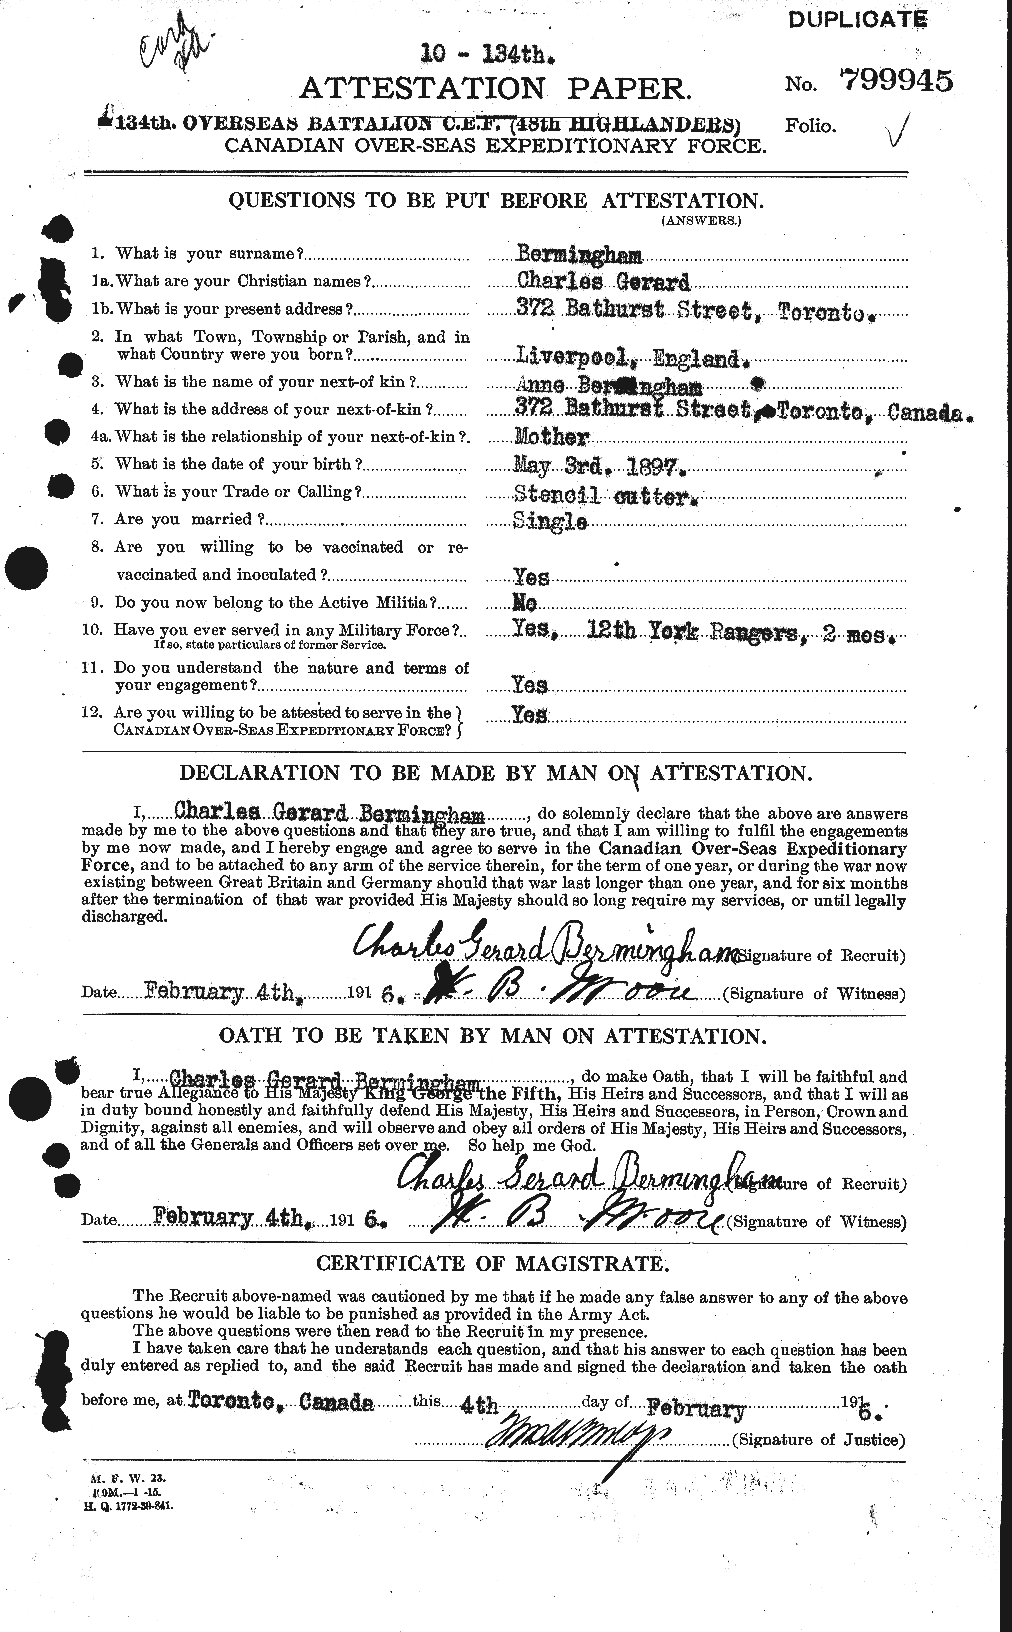 Personnel Records of the First World War - CEF 241891a